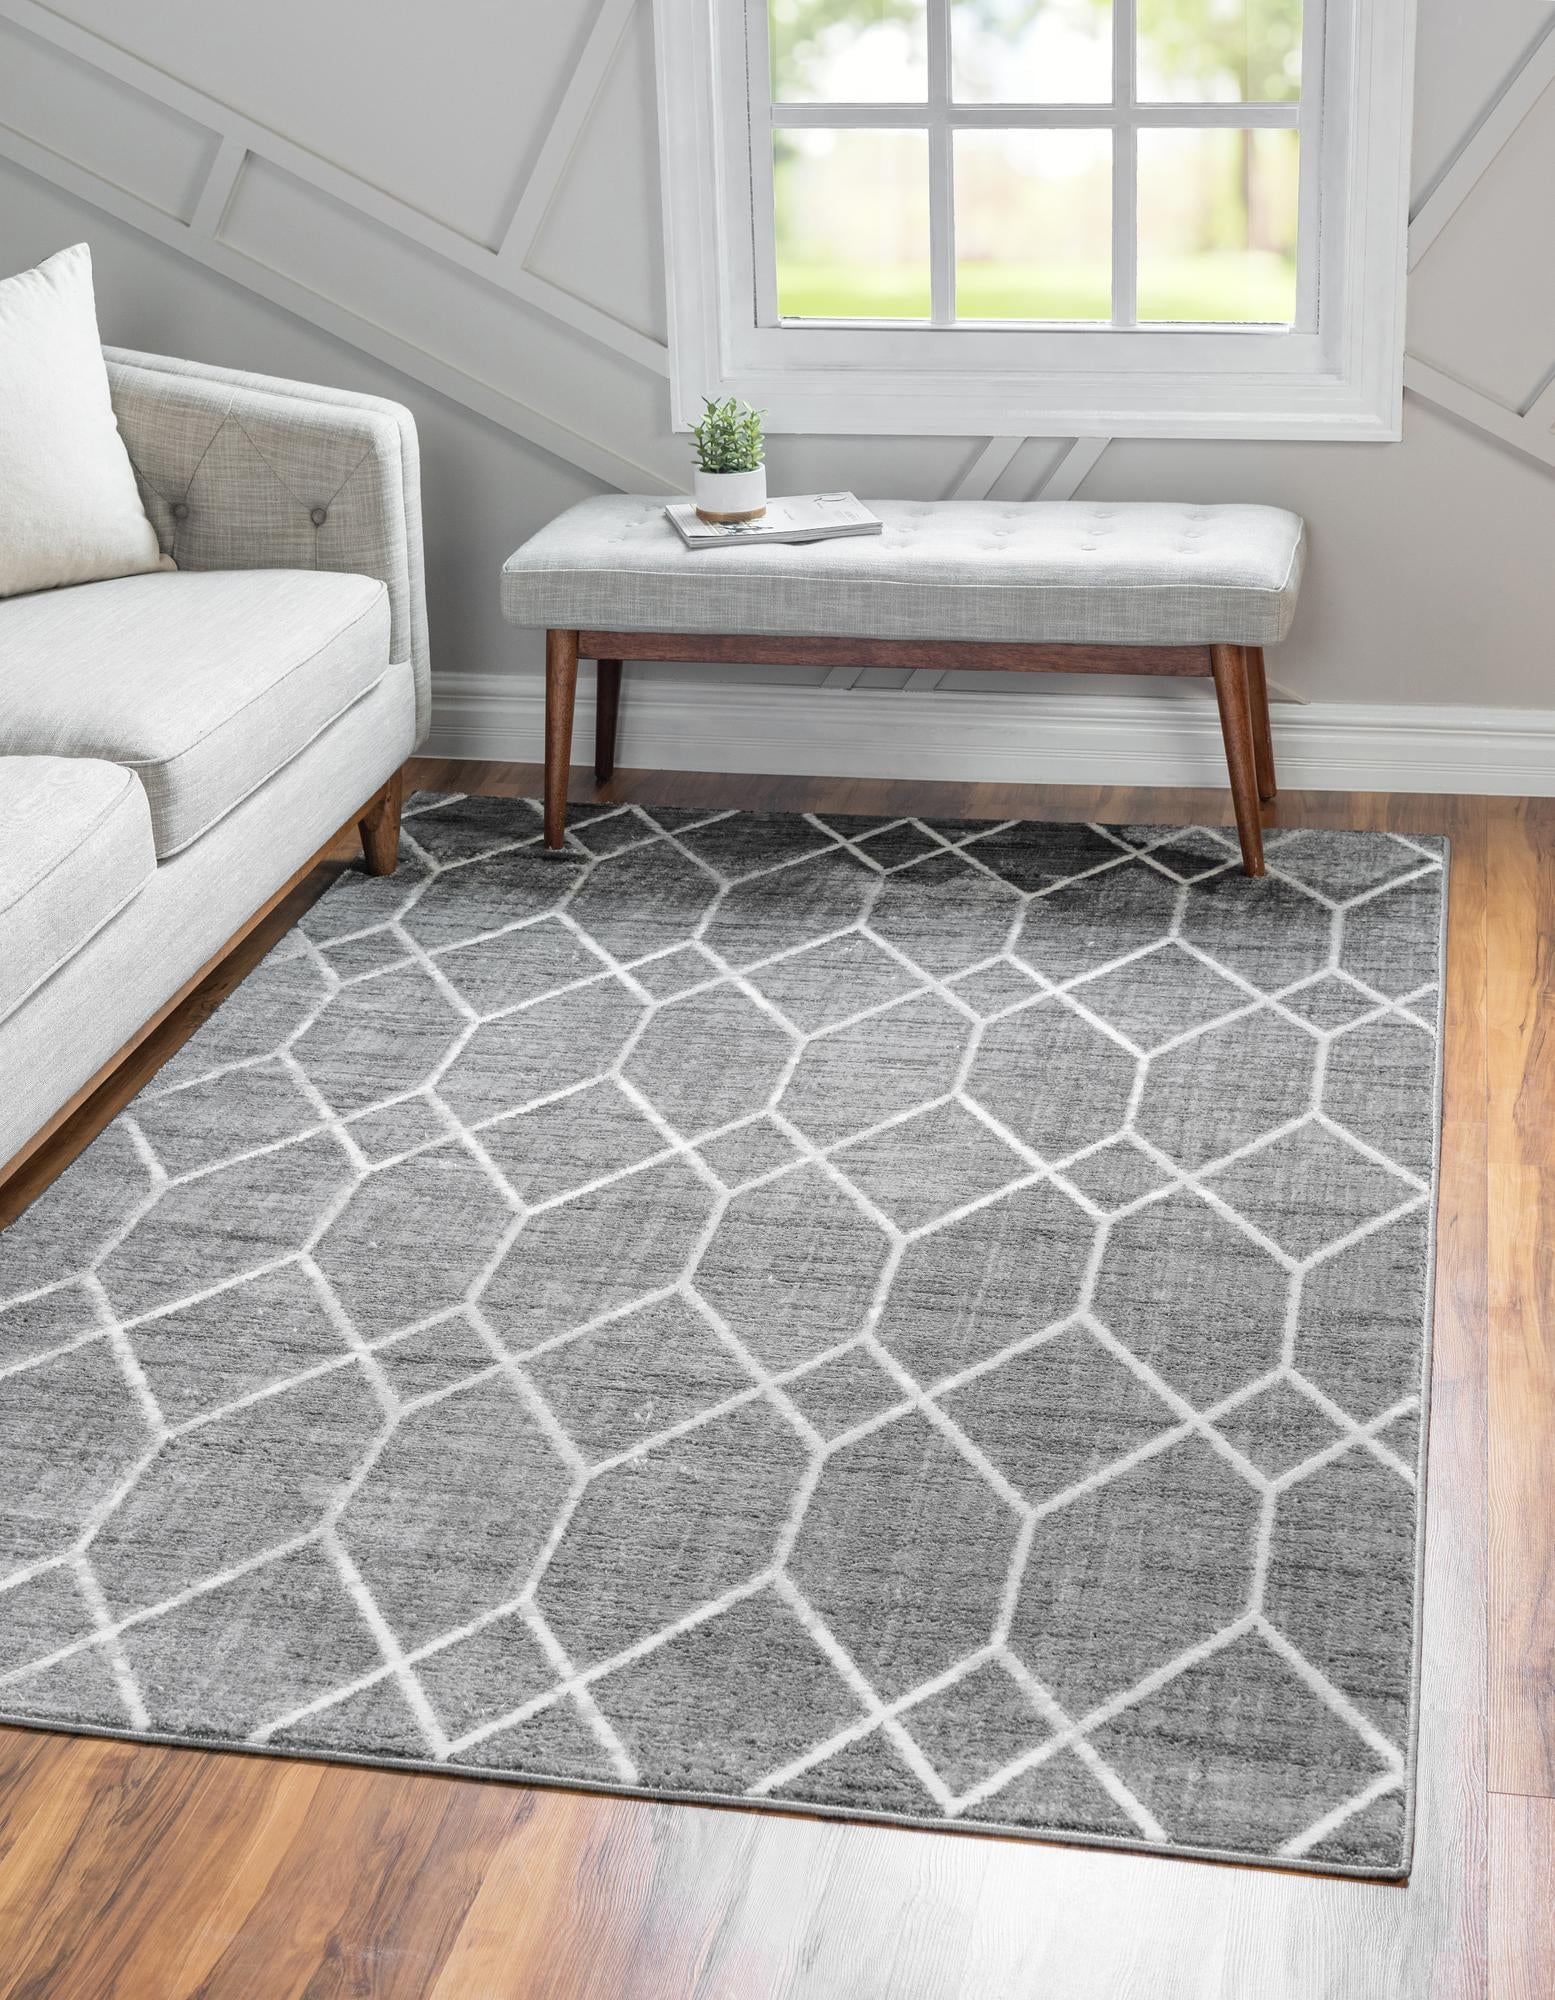 7' x 10' Gray Low-Pile Rug Perfect for Living Rooms Large Dining Rooms Open Floorplans Rugs.com Lattice Trellis Collection Rug